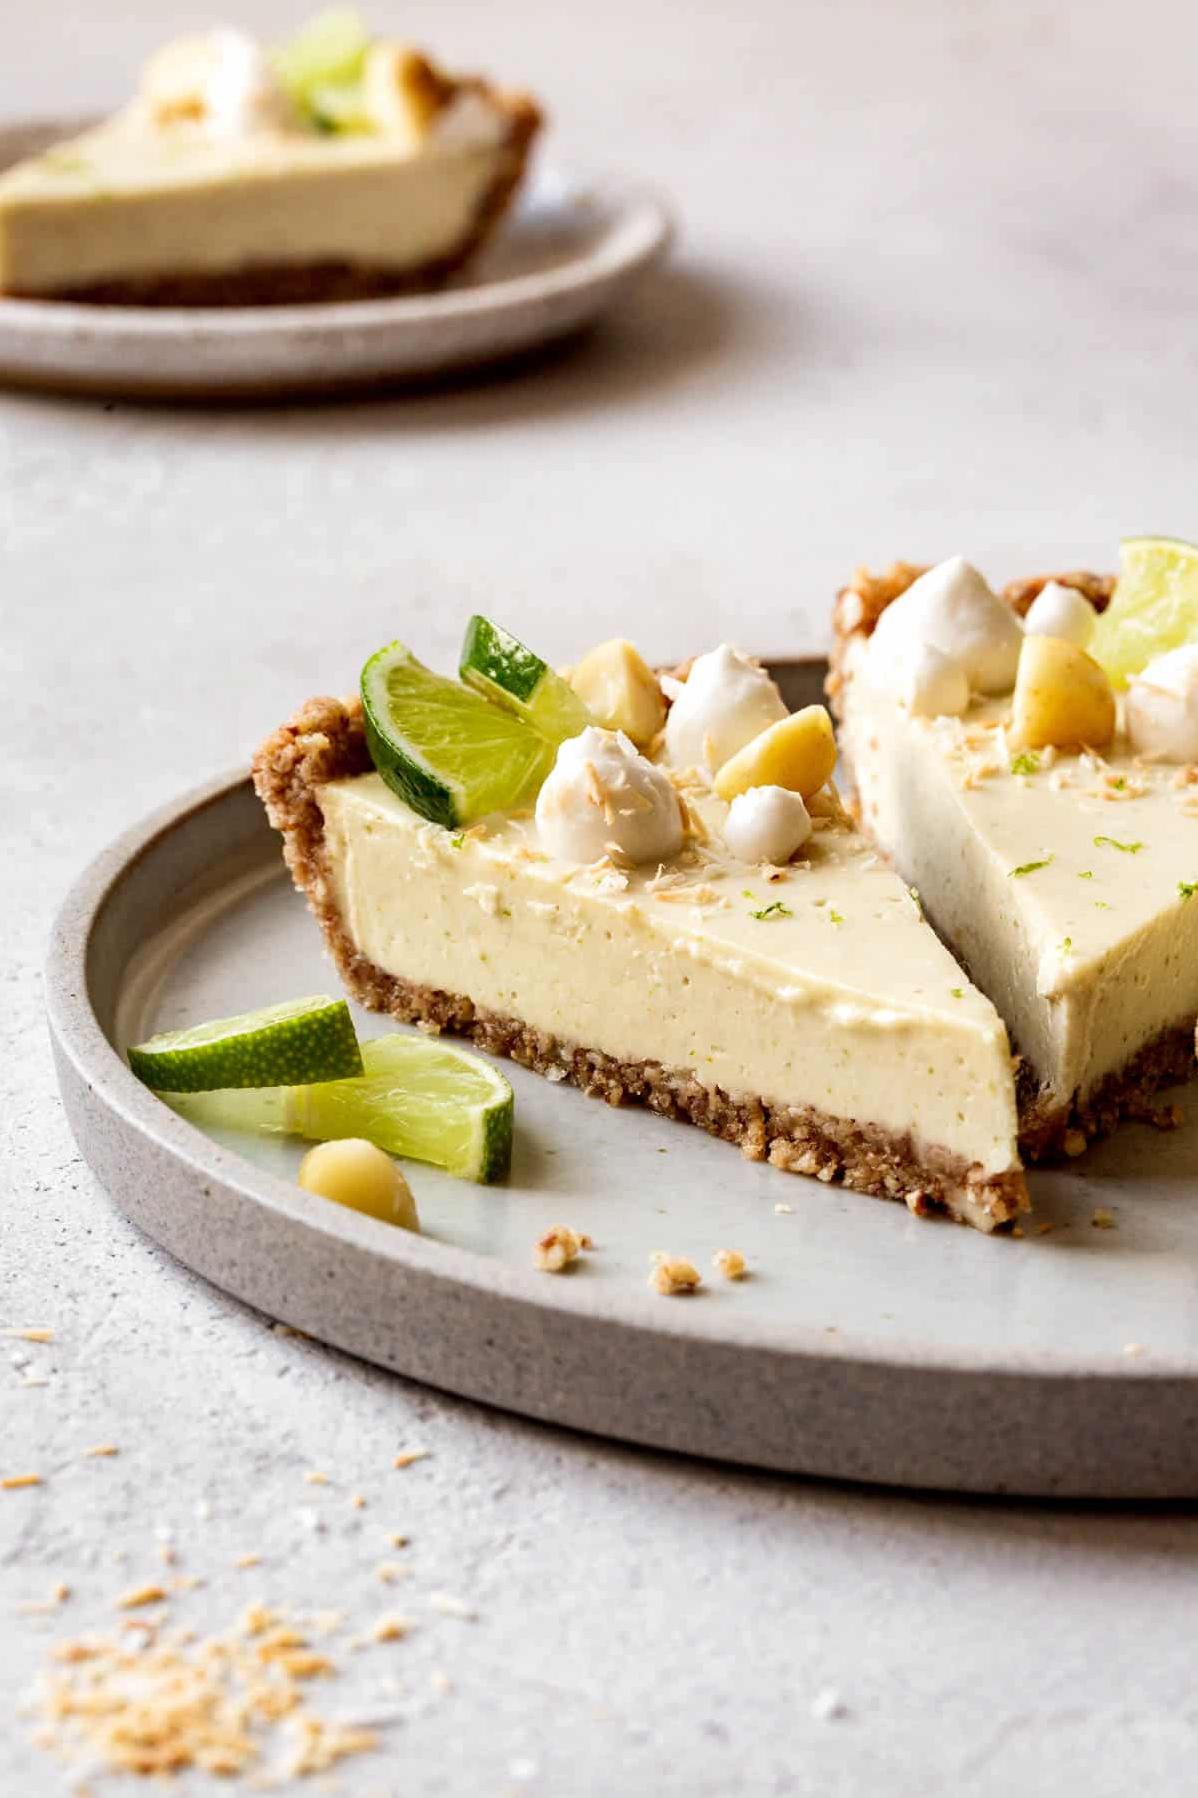  You'll never miss the dairy in this indulgent and guilt-free pie.